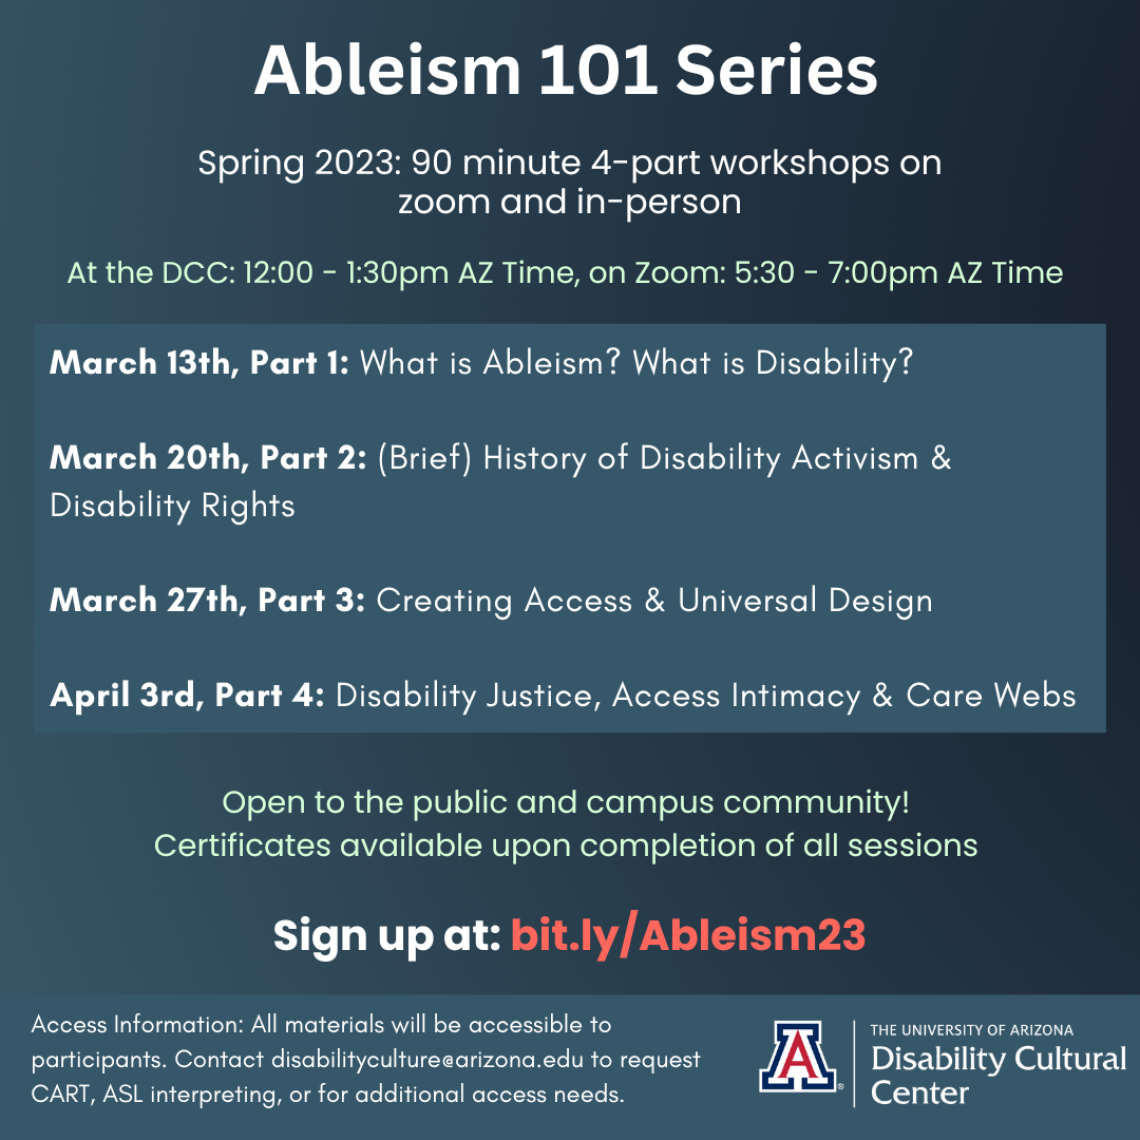 Flyer for Spring 2023 Ableism 101 Series